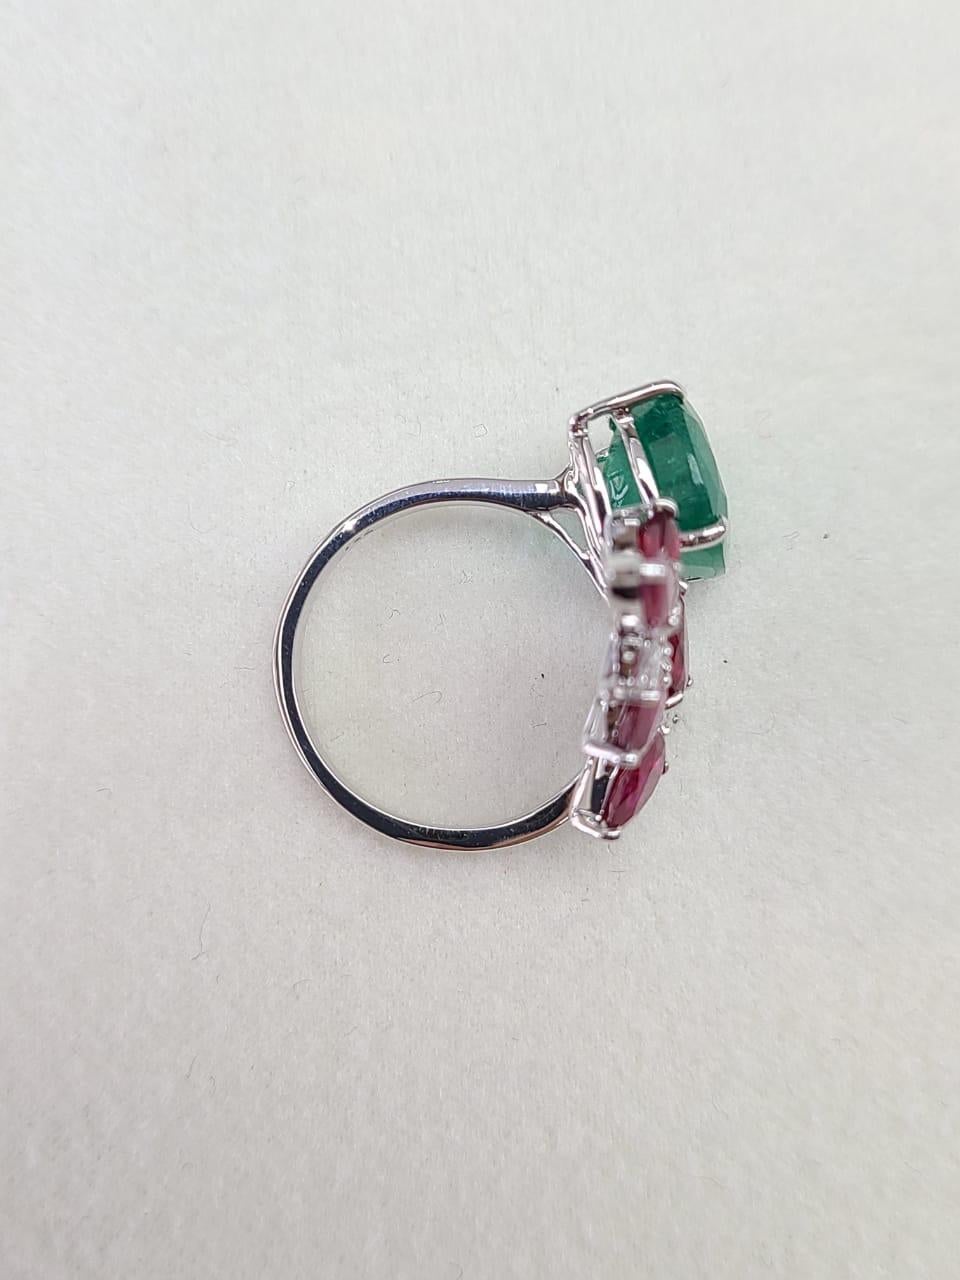 A very gorgeous Zambian Emerald & Ruby Cocktail Ring set in 18K Gold & Diamonds. The Emerald is of Zambian origin and is completely natural without any treatment. The marquise shaped Ruby is from Mozambique and is also completely natural without any